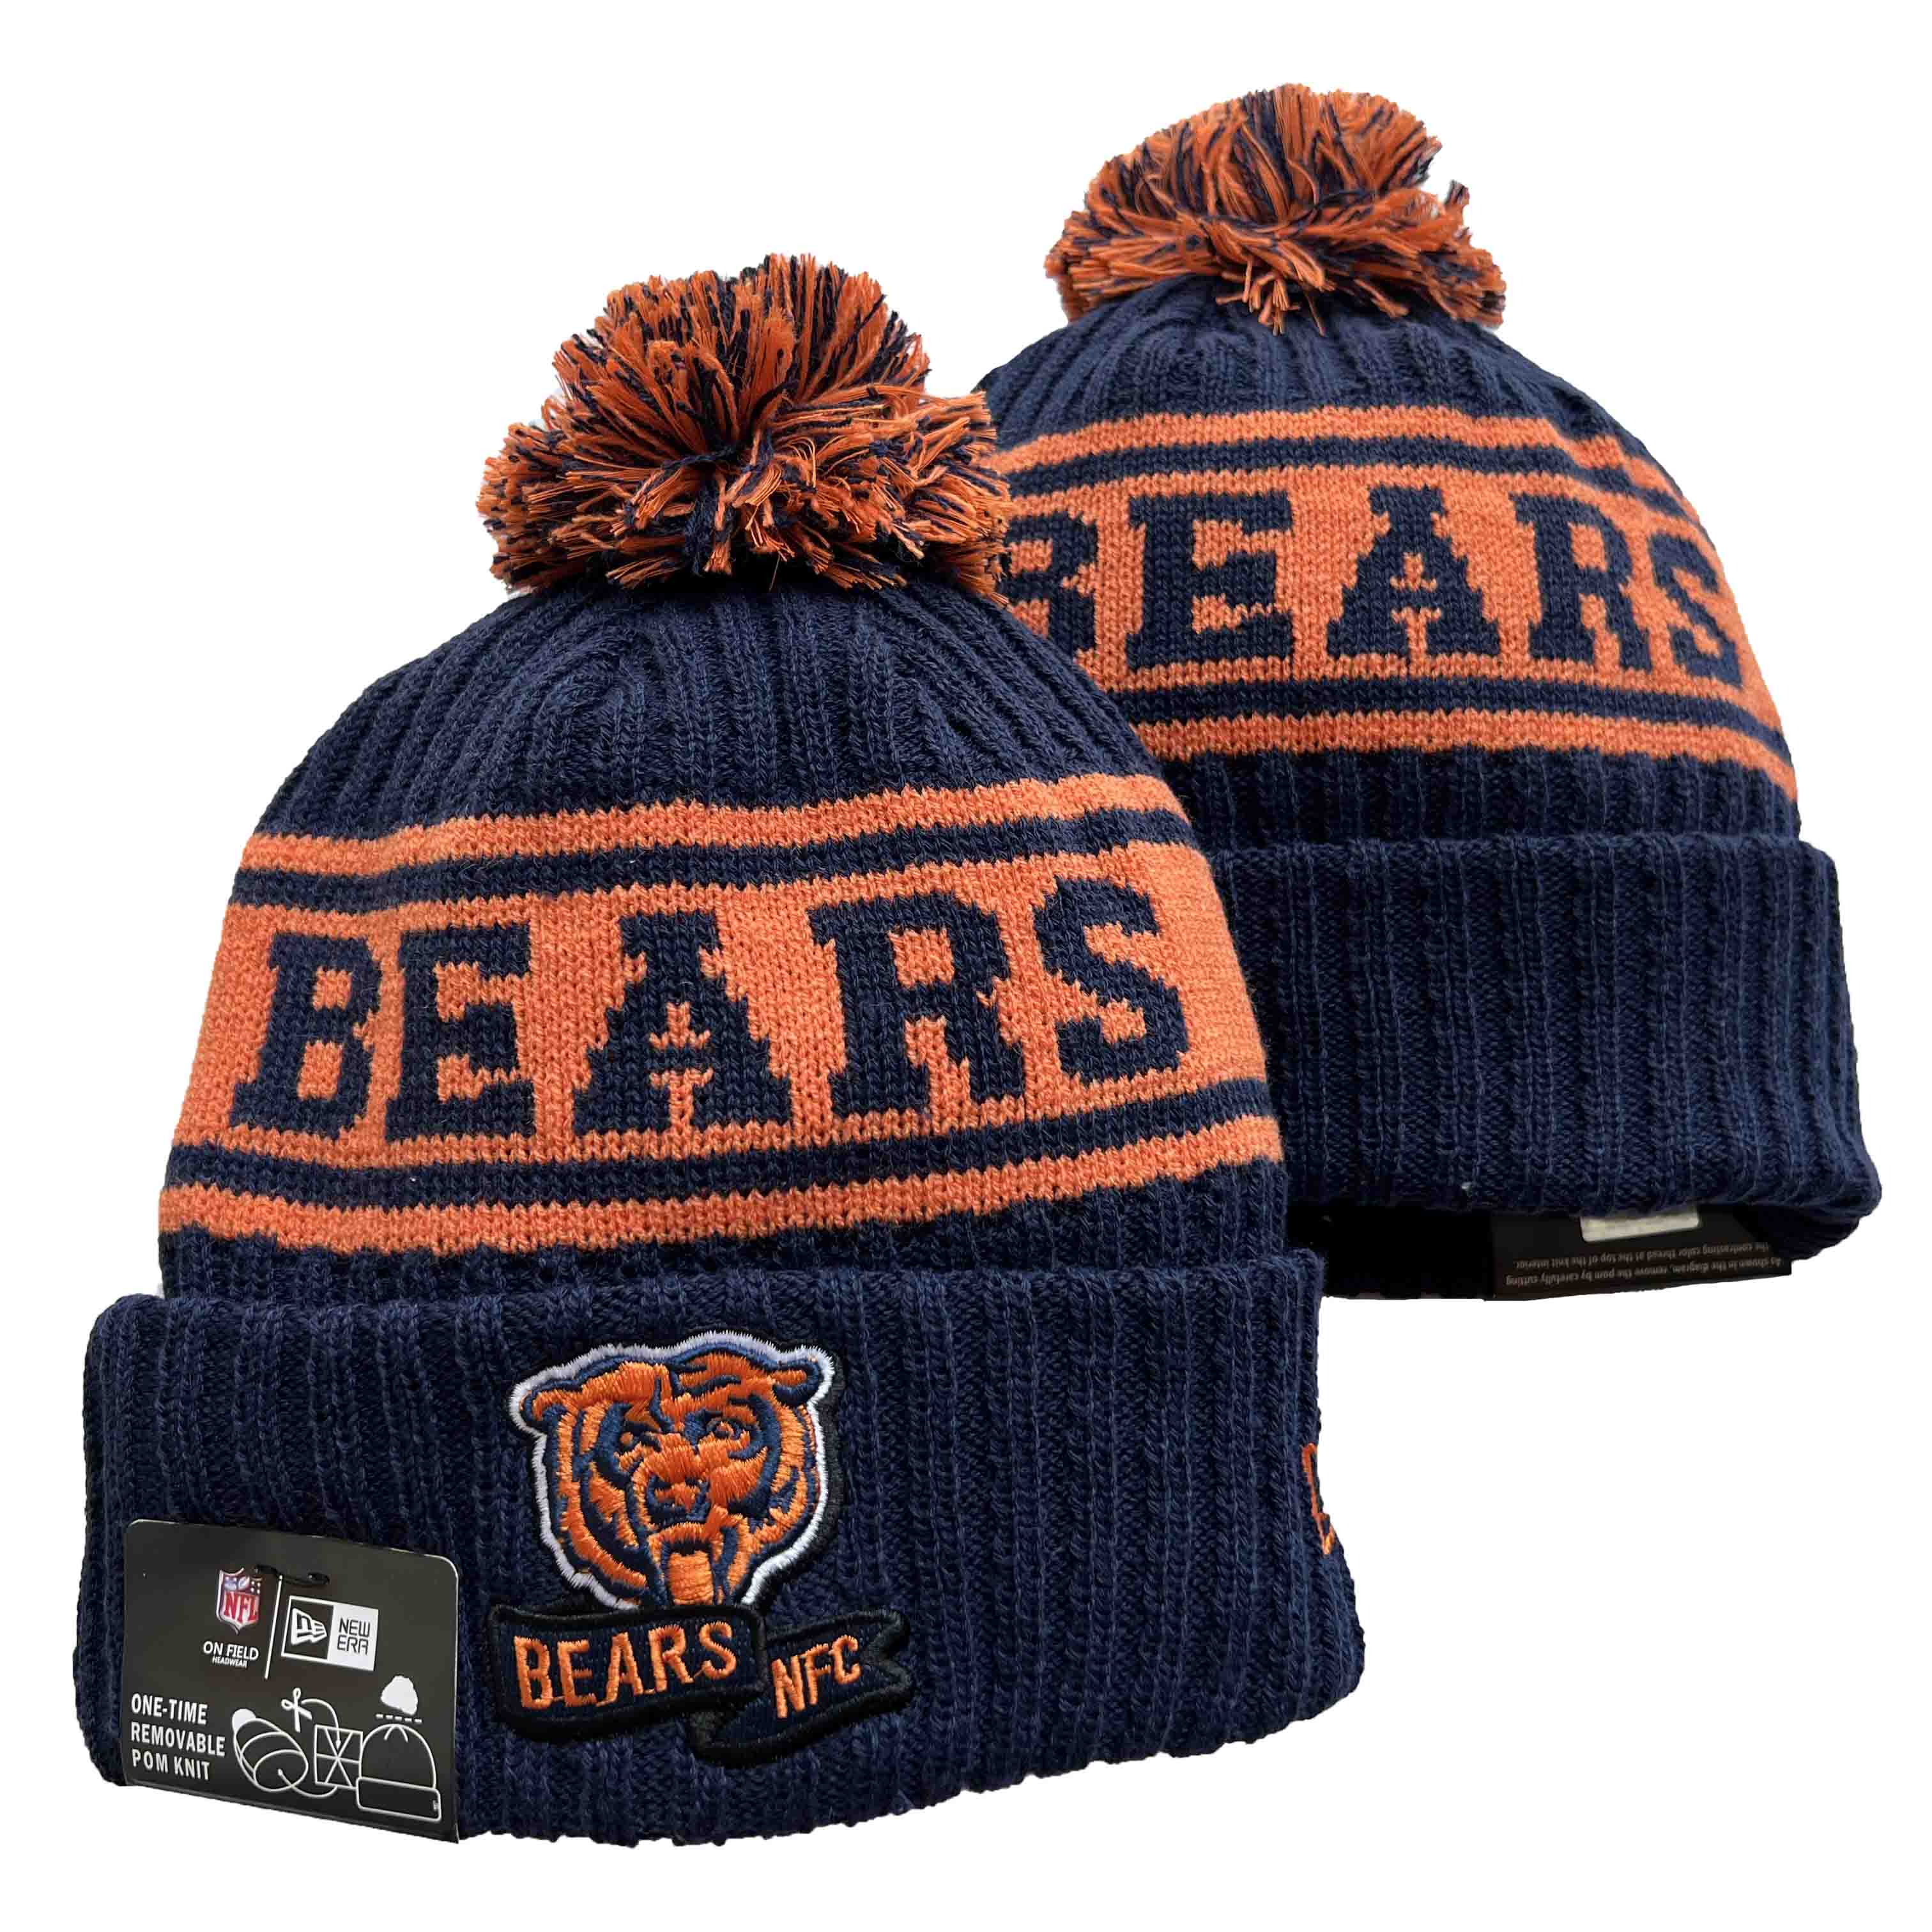 NFL Chicago Bears Beanies Knit Hats-YD890